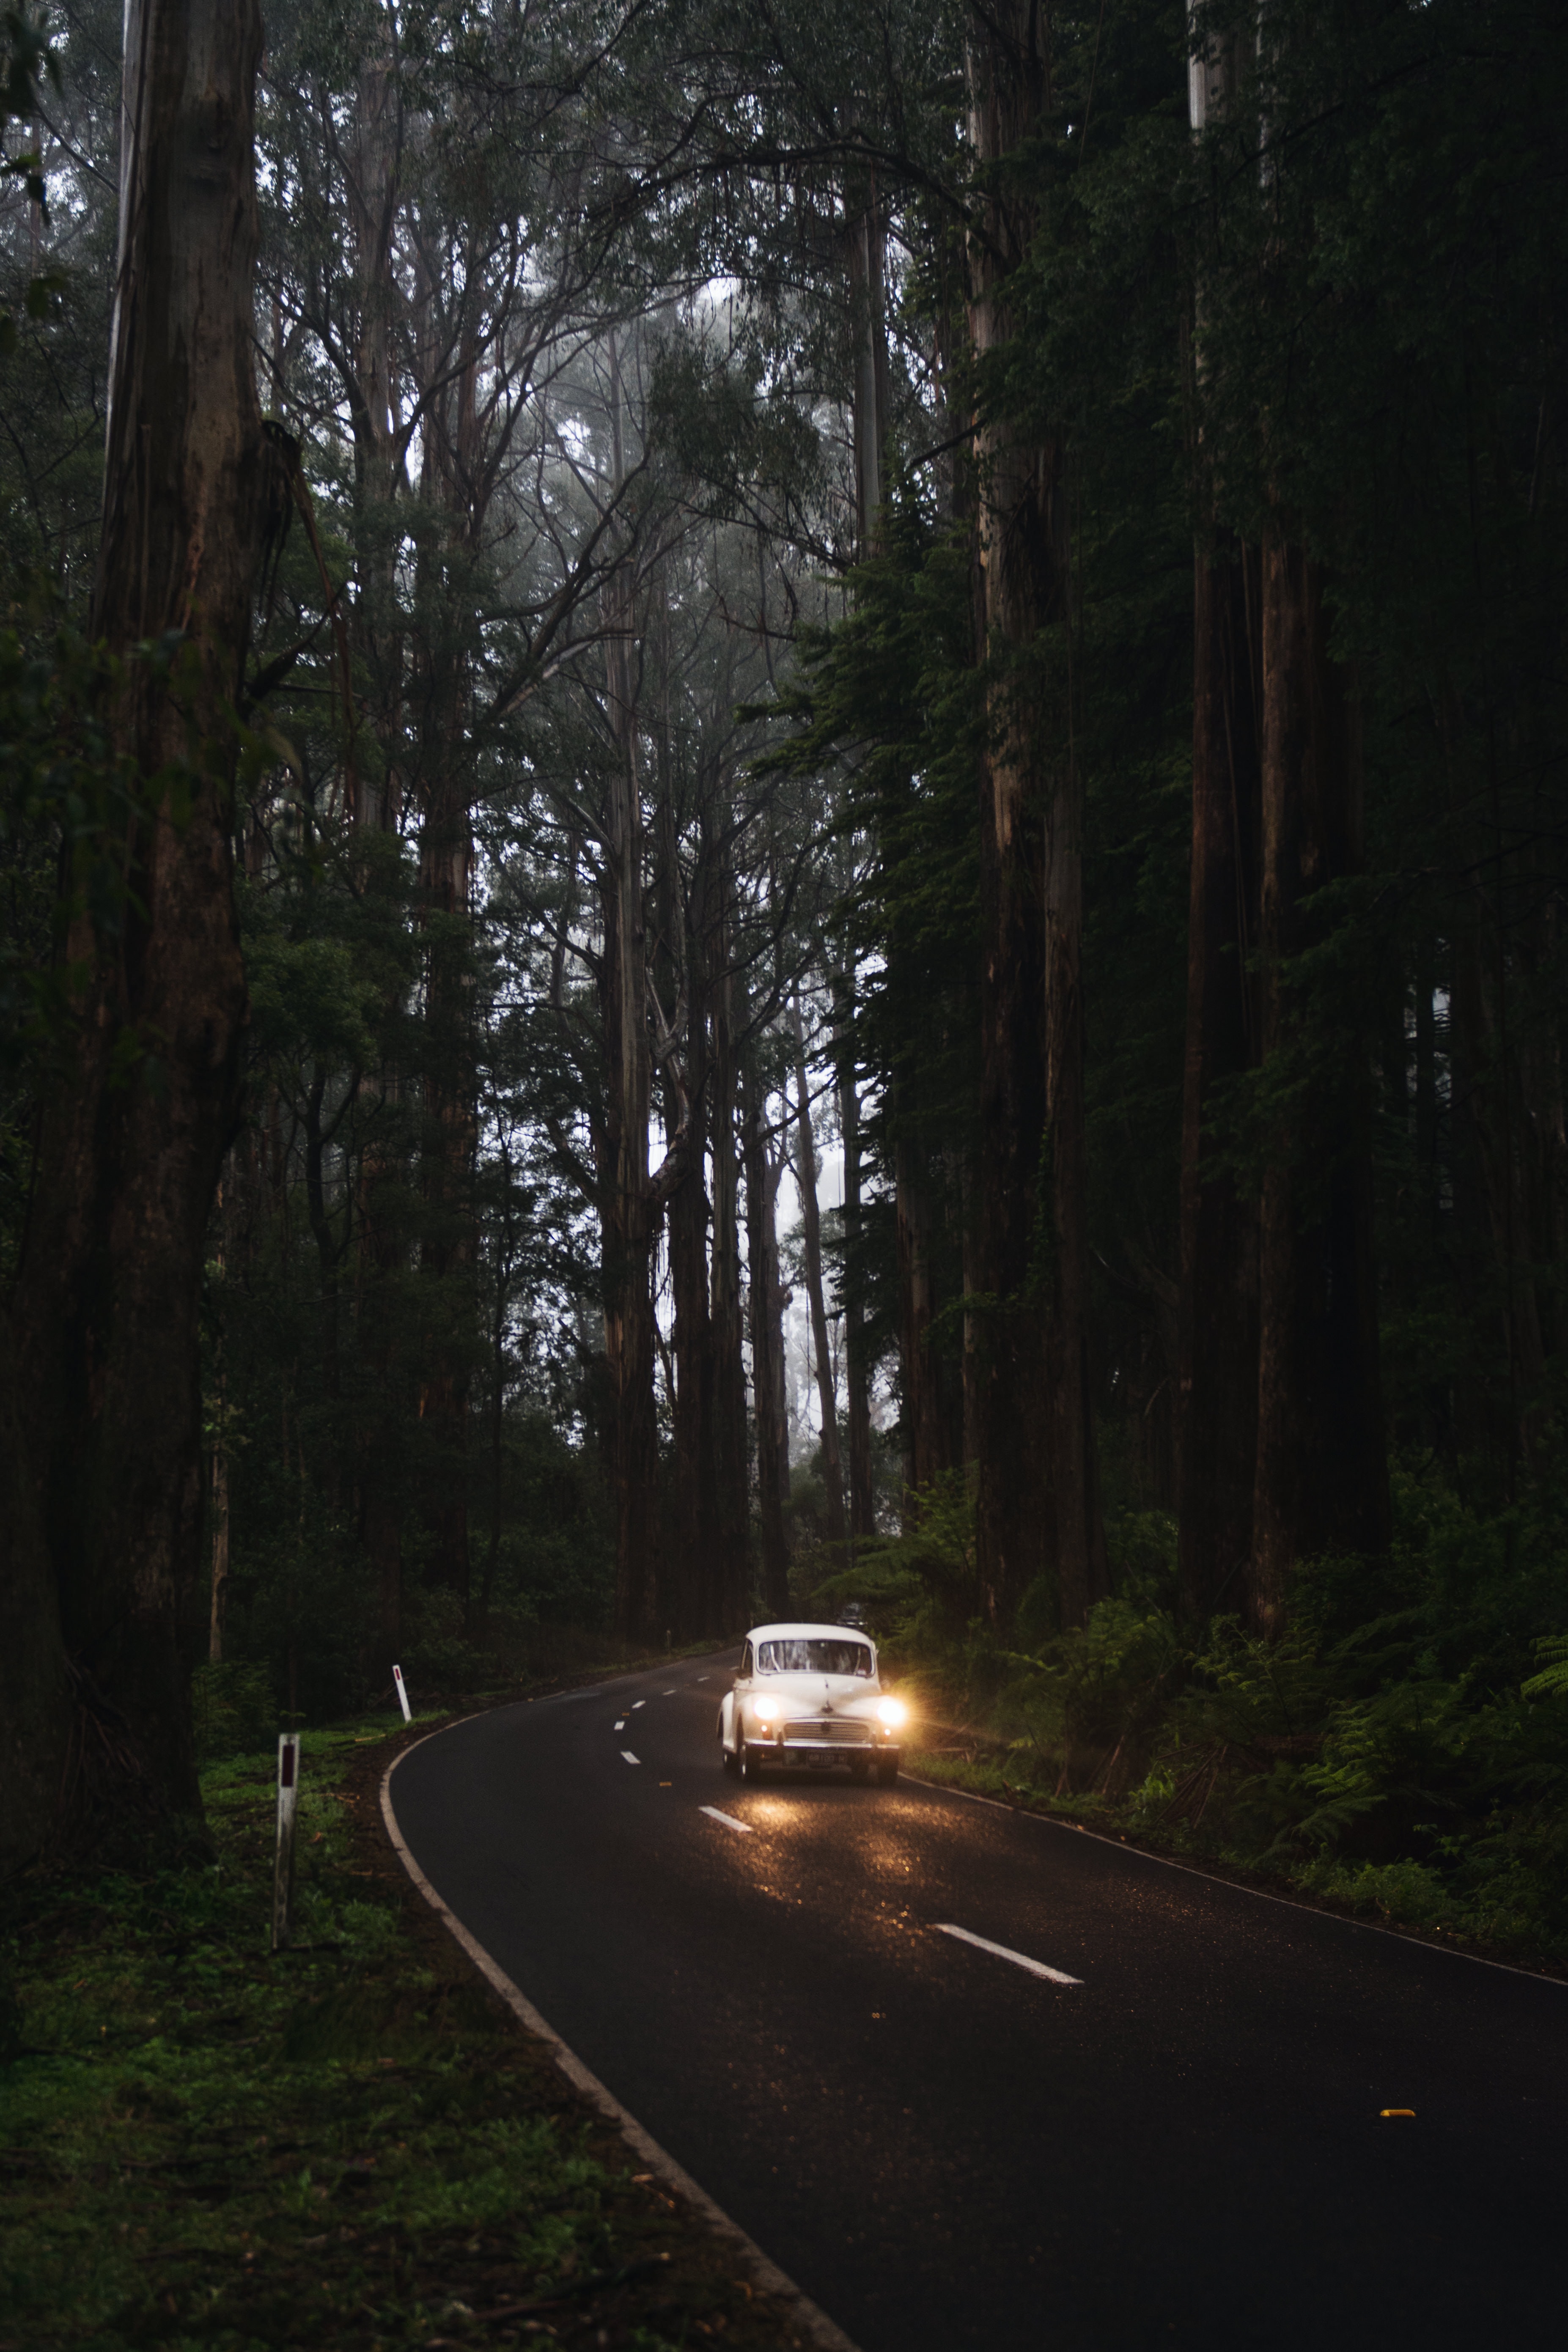 trees, headlights, car, road download for free